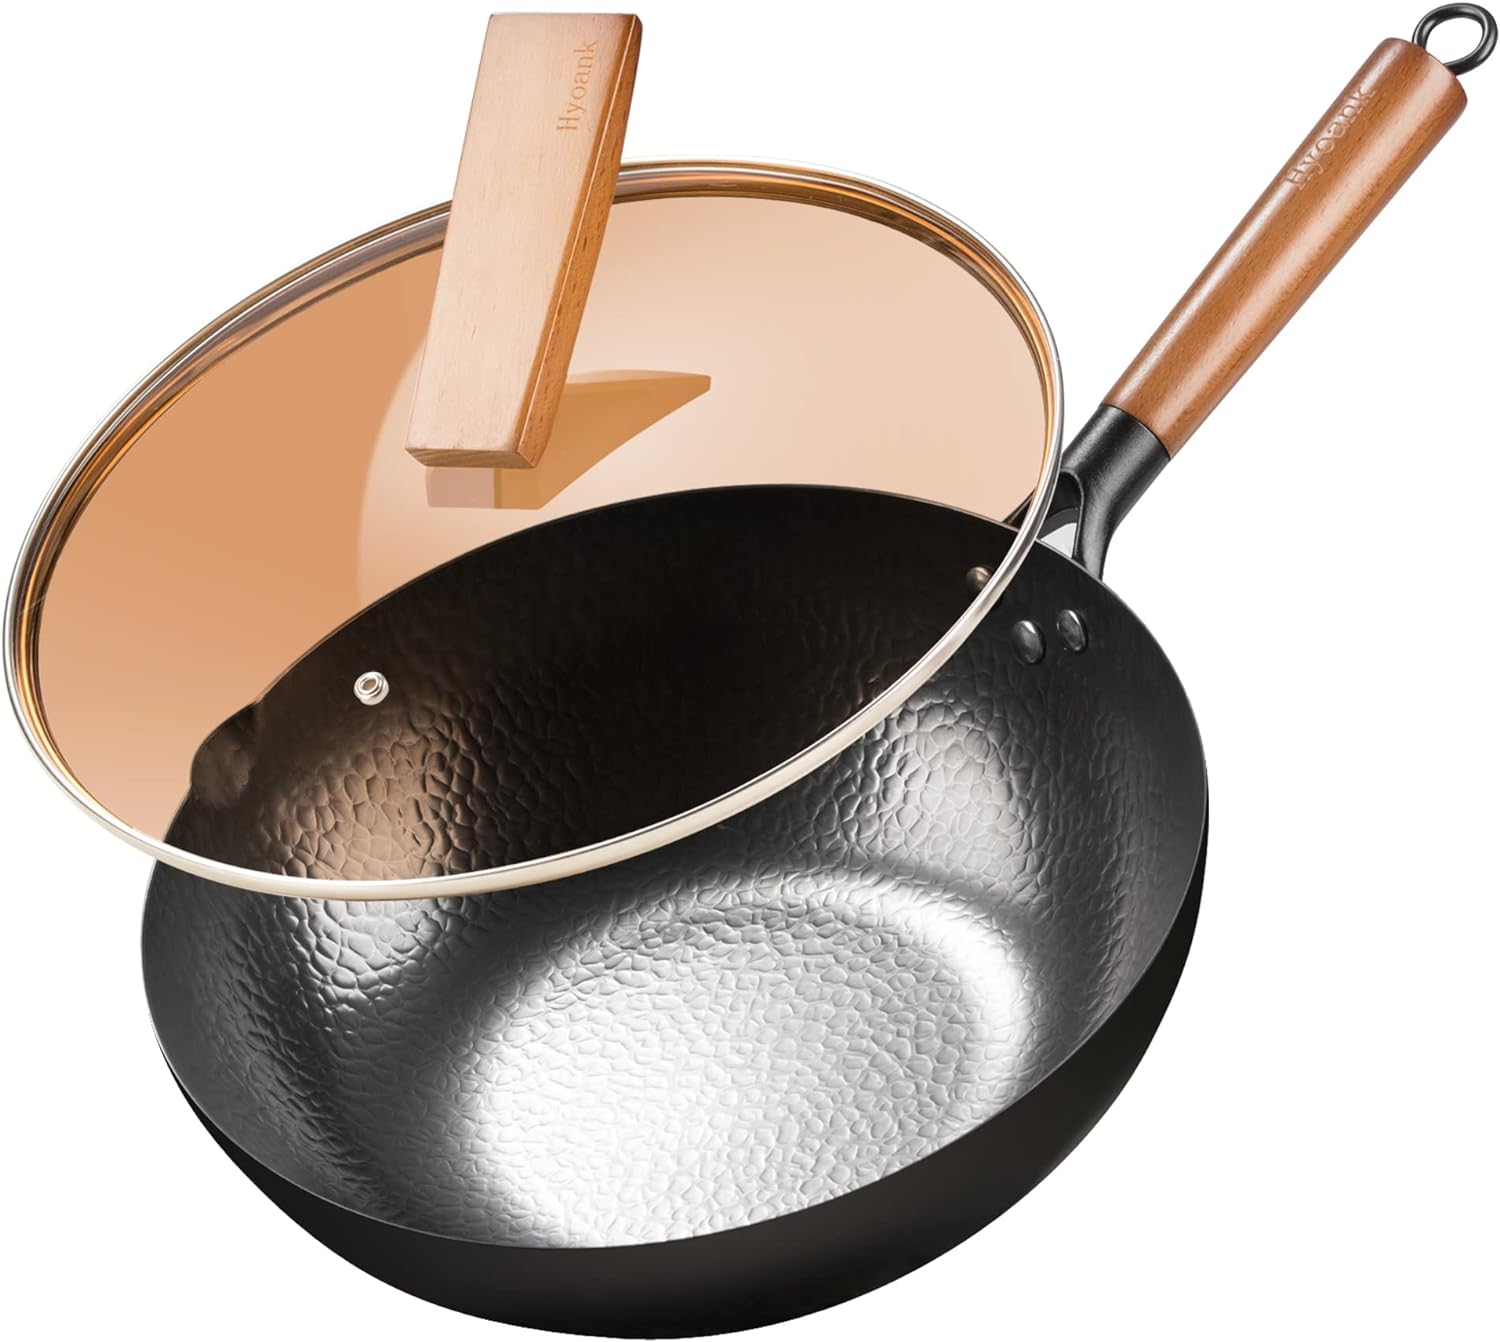 AsianTraditional Wok Pan Review